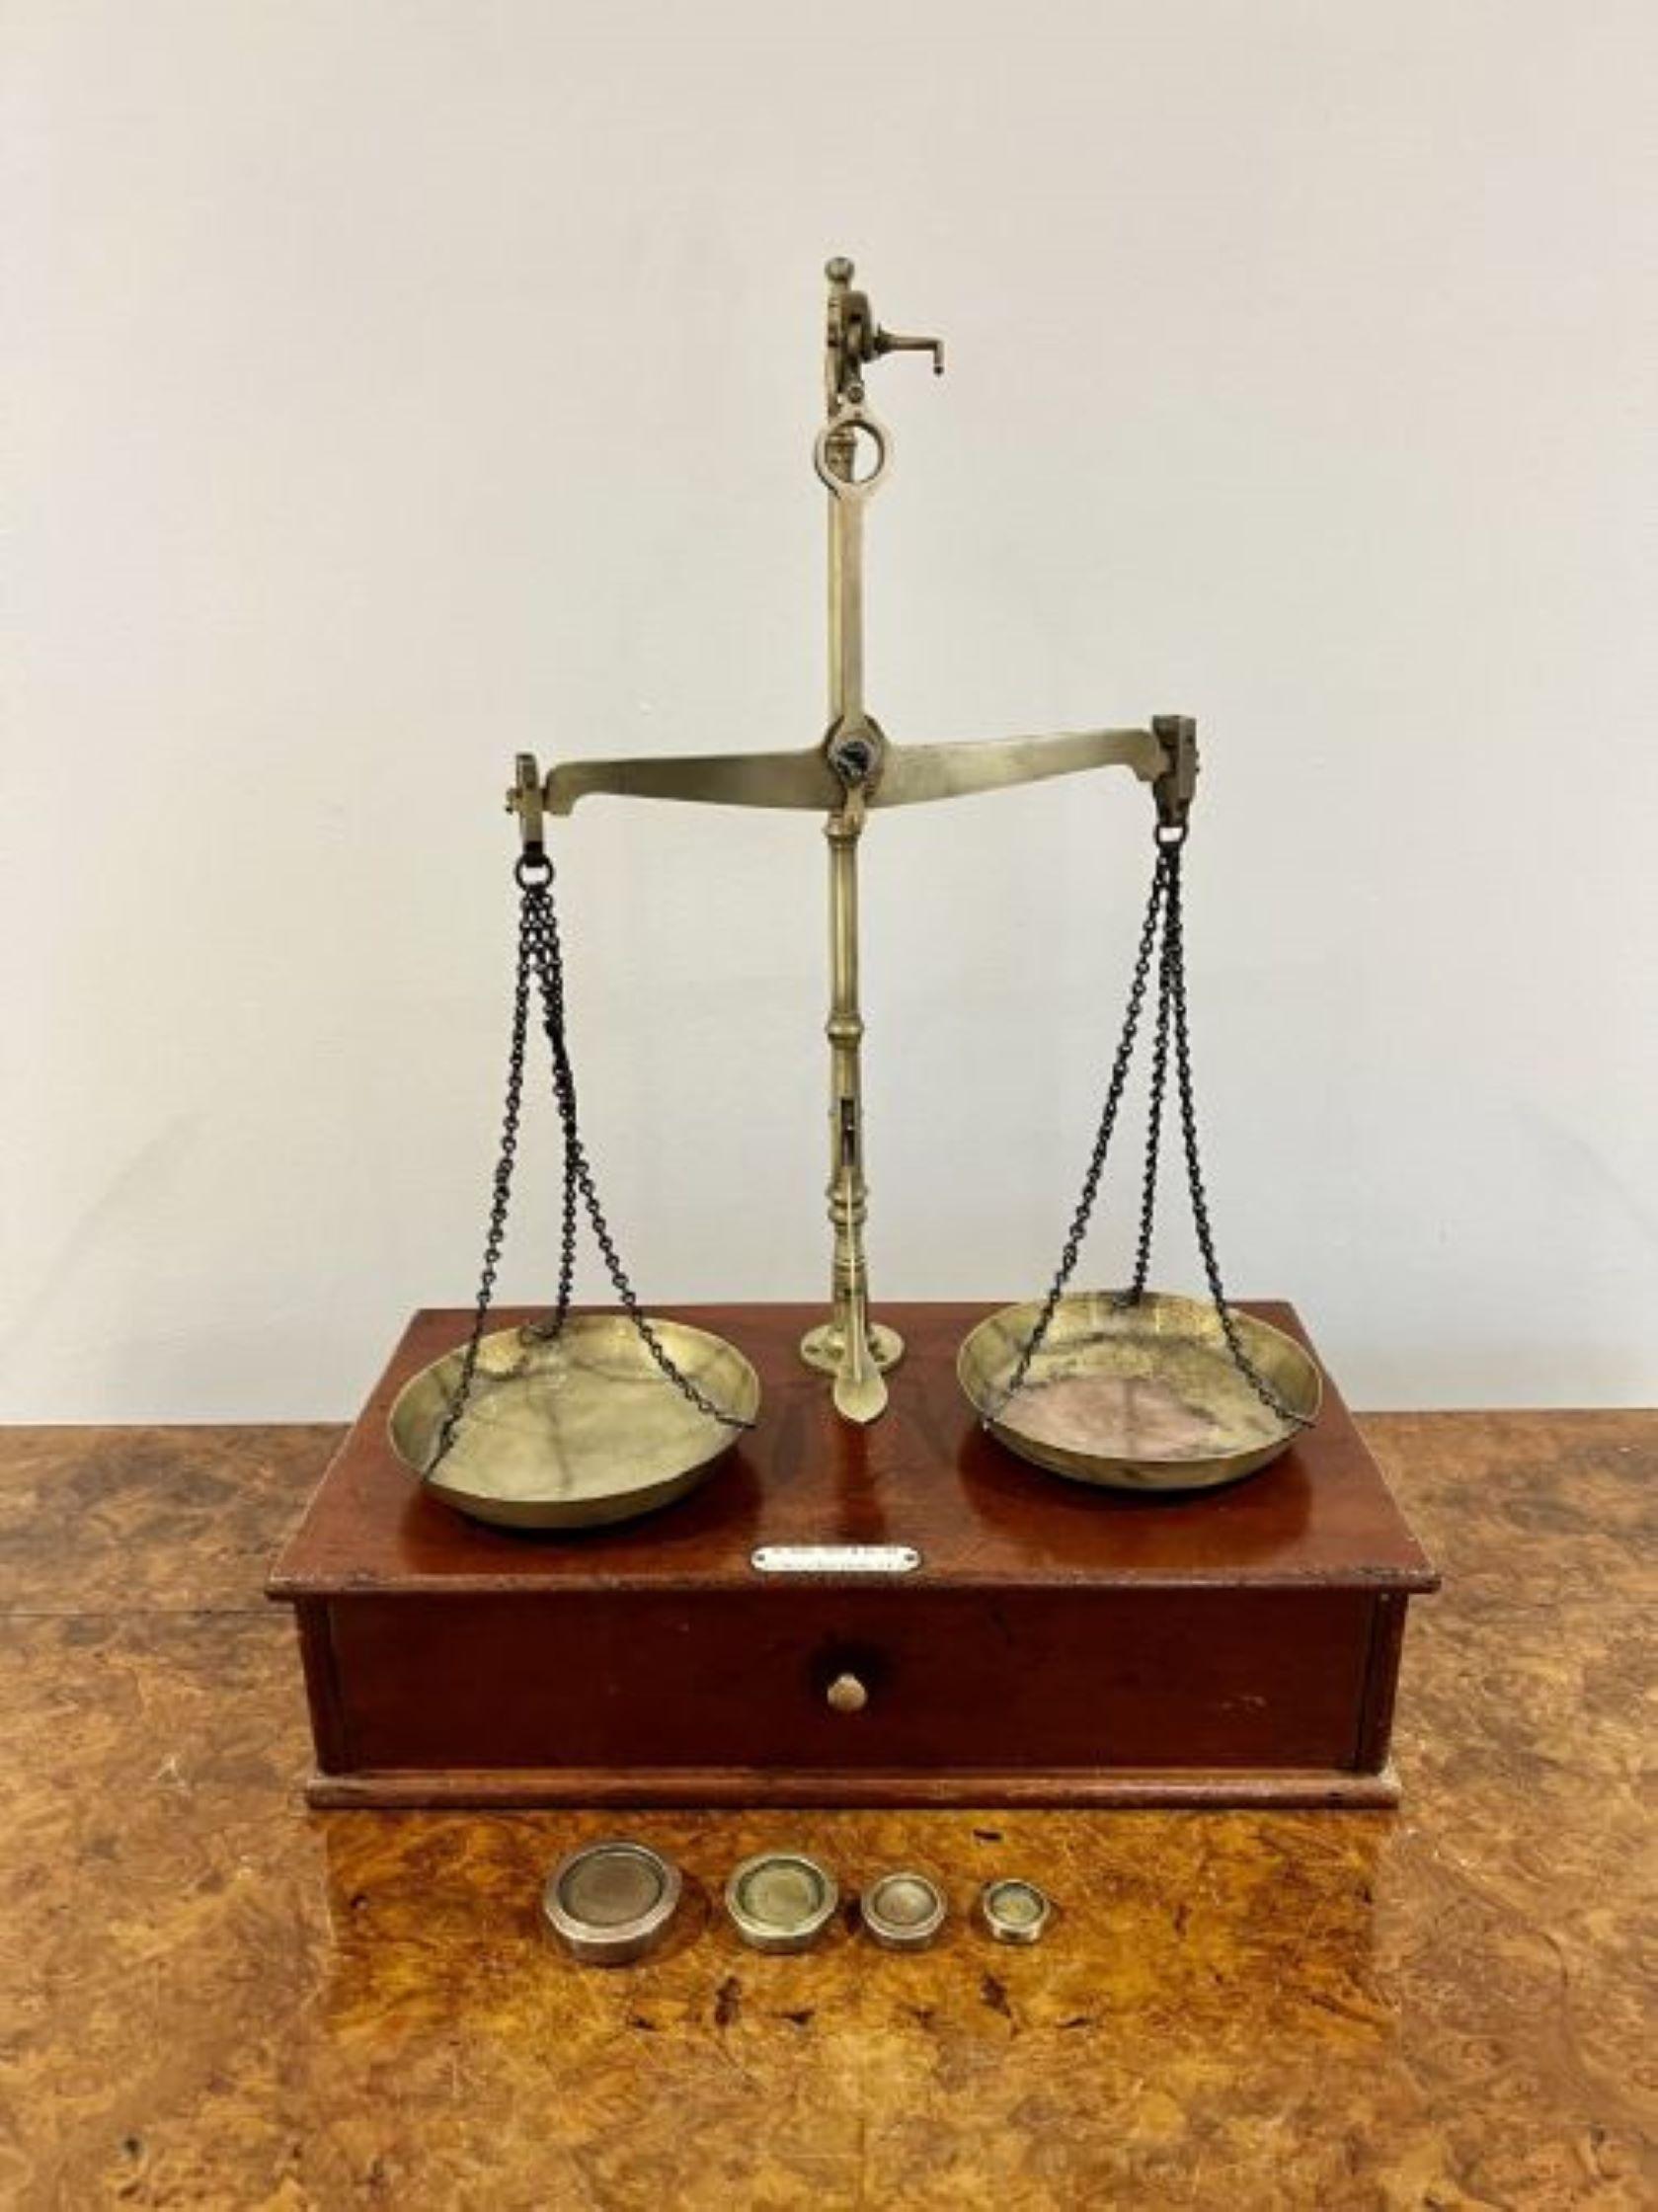 Quality pair of antique Victorian brass beam scales with the original weights, bearing makers label for De Grave, Short & Co, London